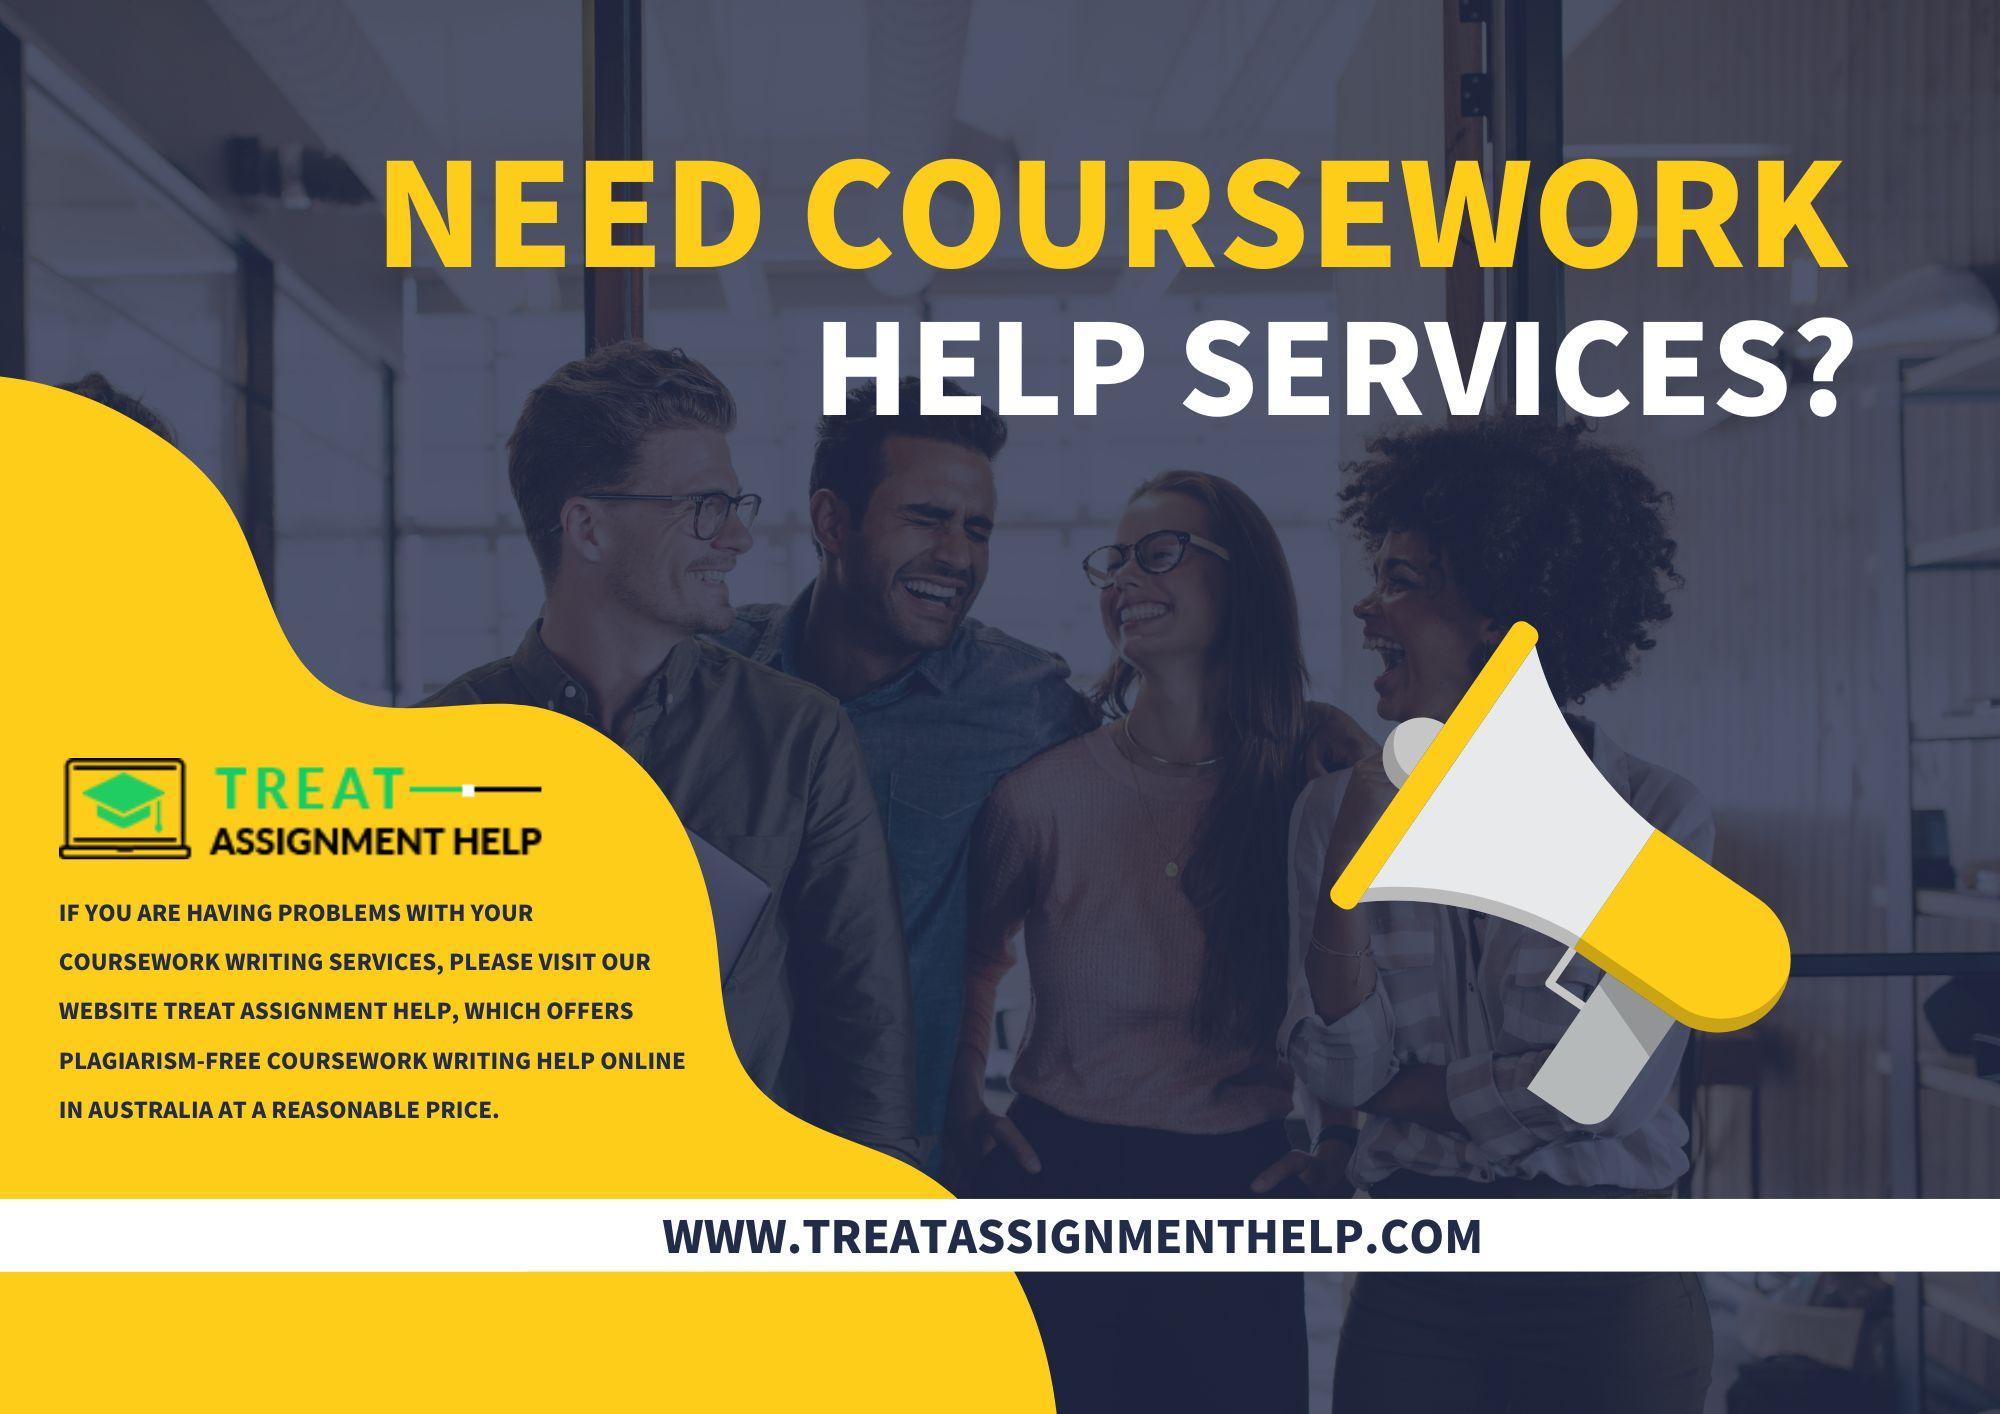 Treat Assignment Help providing plagiarism free coursework writing help online in Australia online at reasonable price.